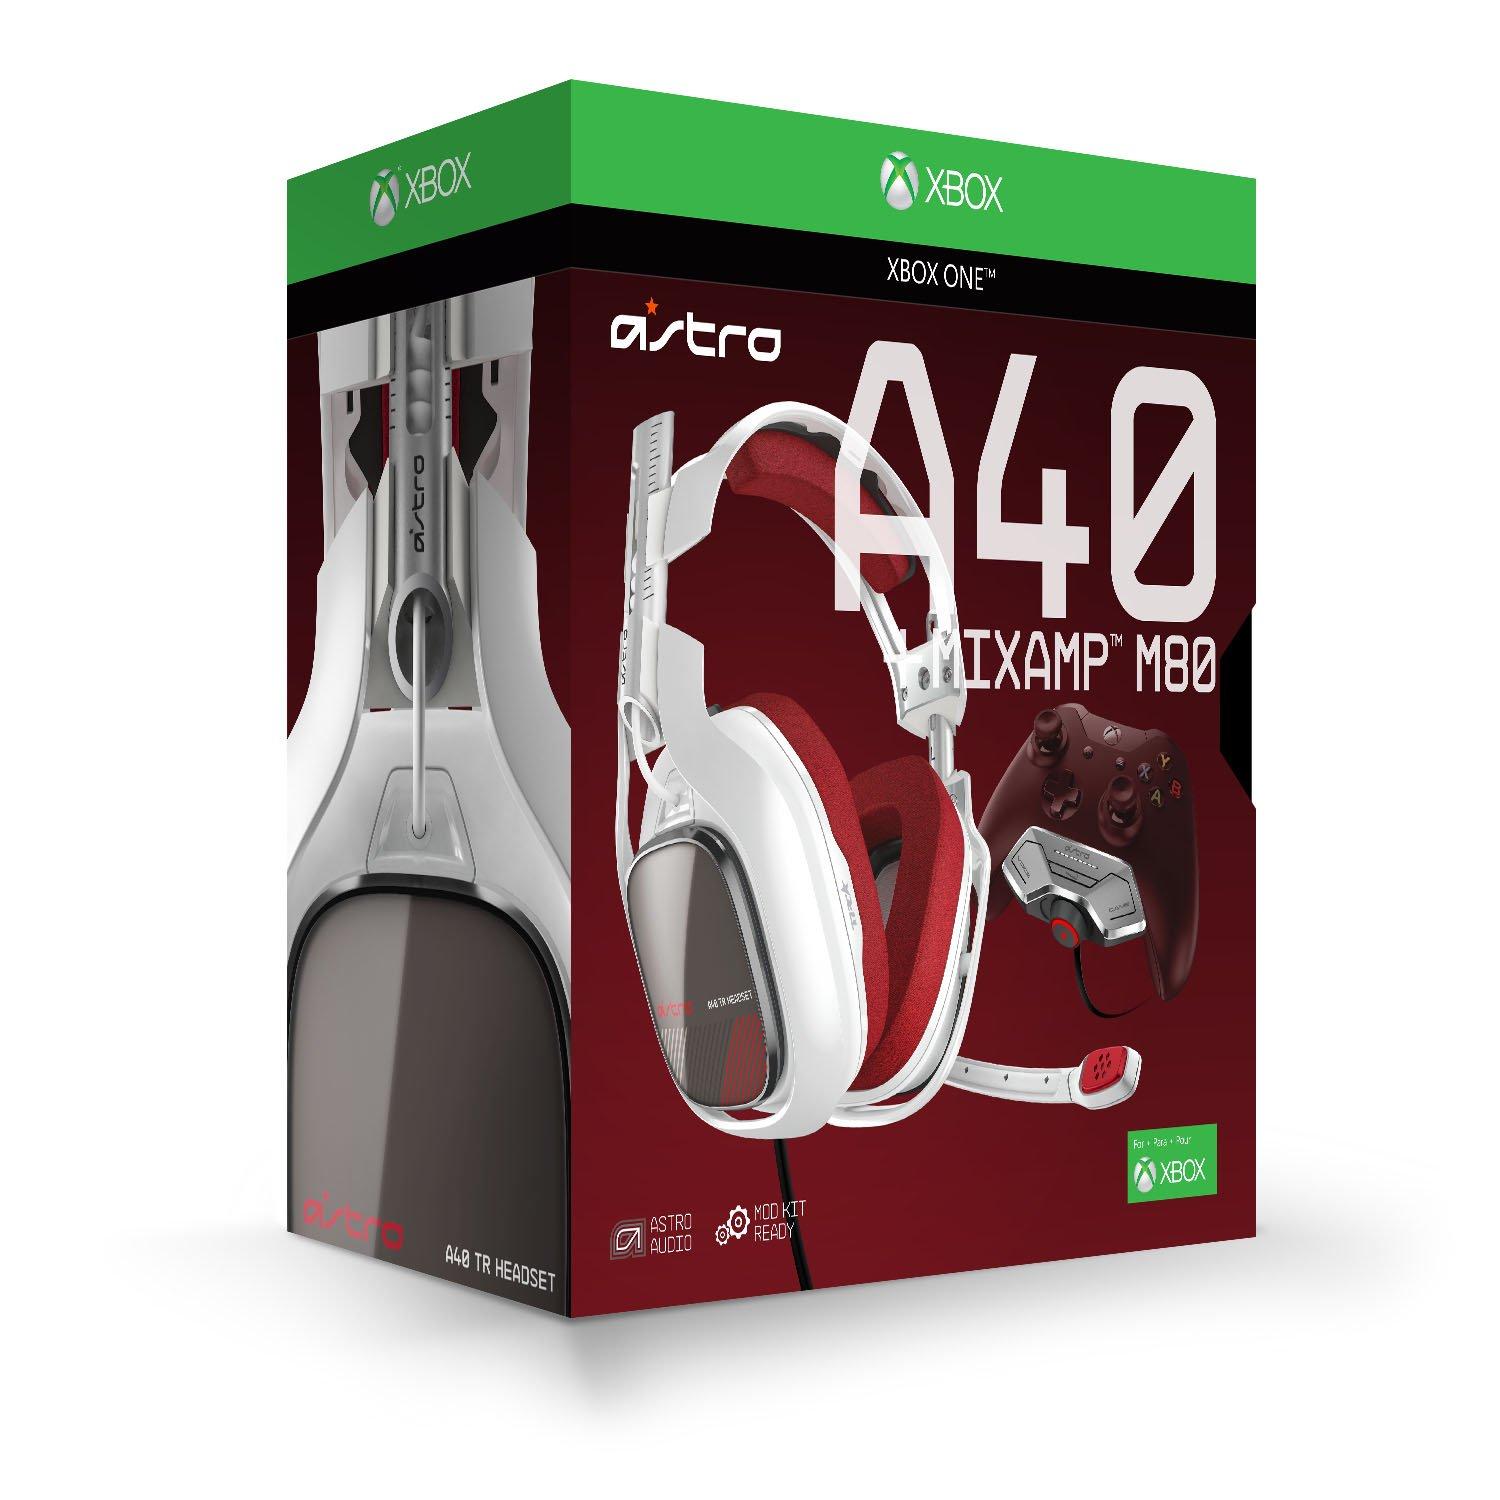 Astro 0 Tr White Wired Gaming Headset And Mixamp M80 For Xbox One Xbox One Gamestop